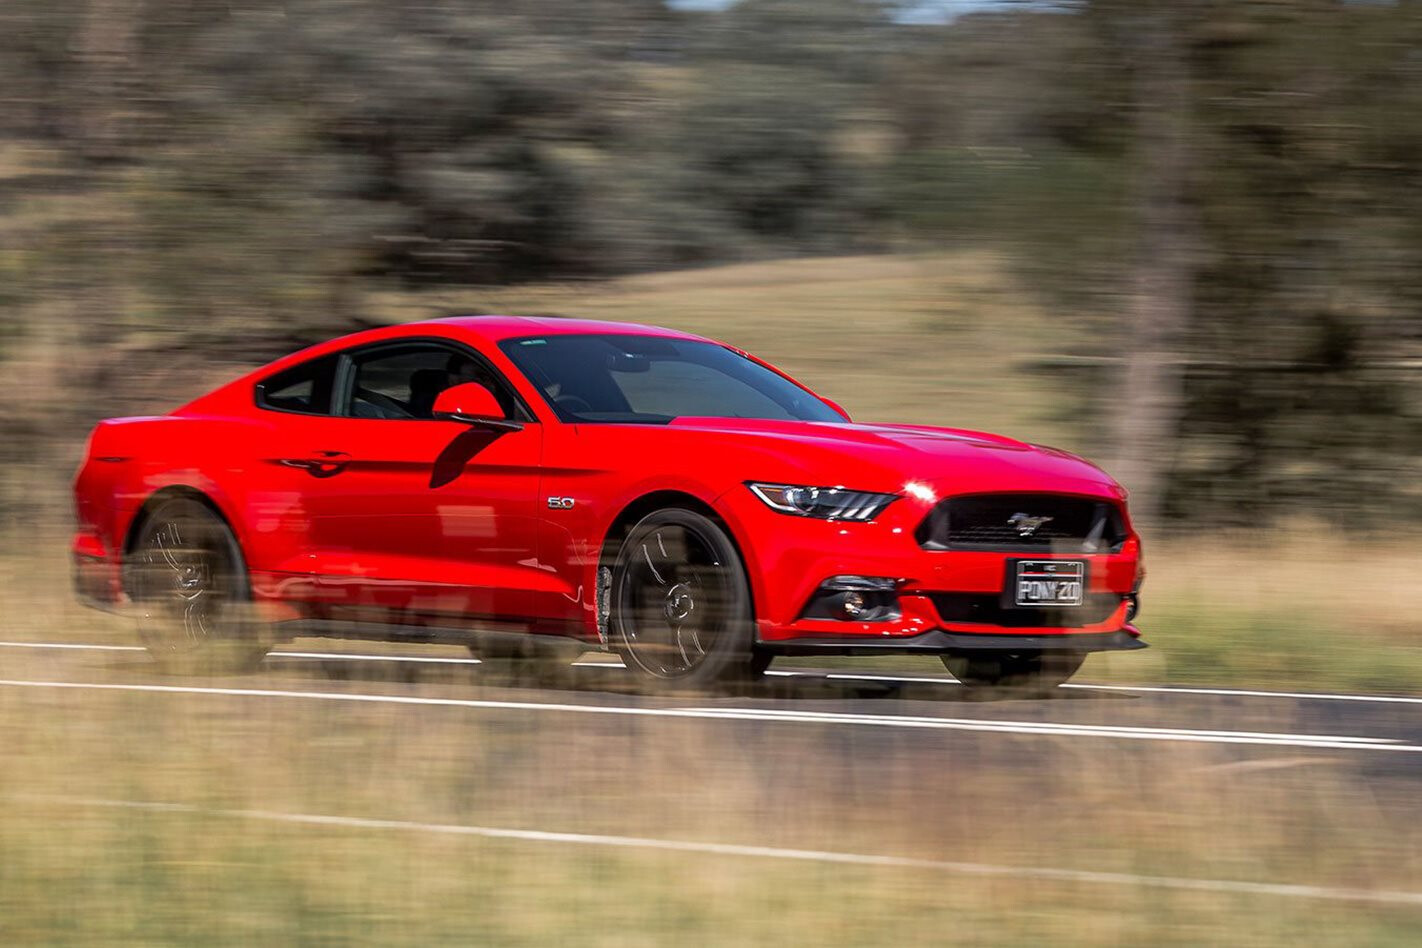 Ford ‘2nd Car’ subscription scheme launched in Australia